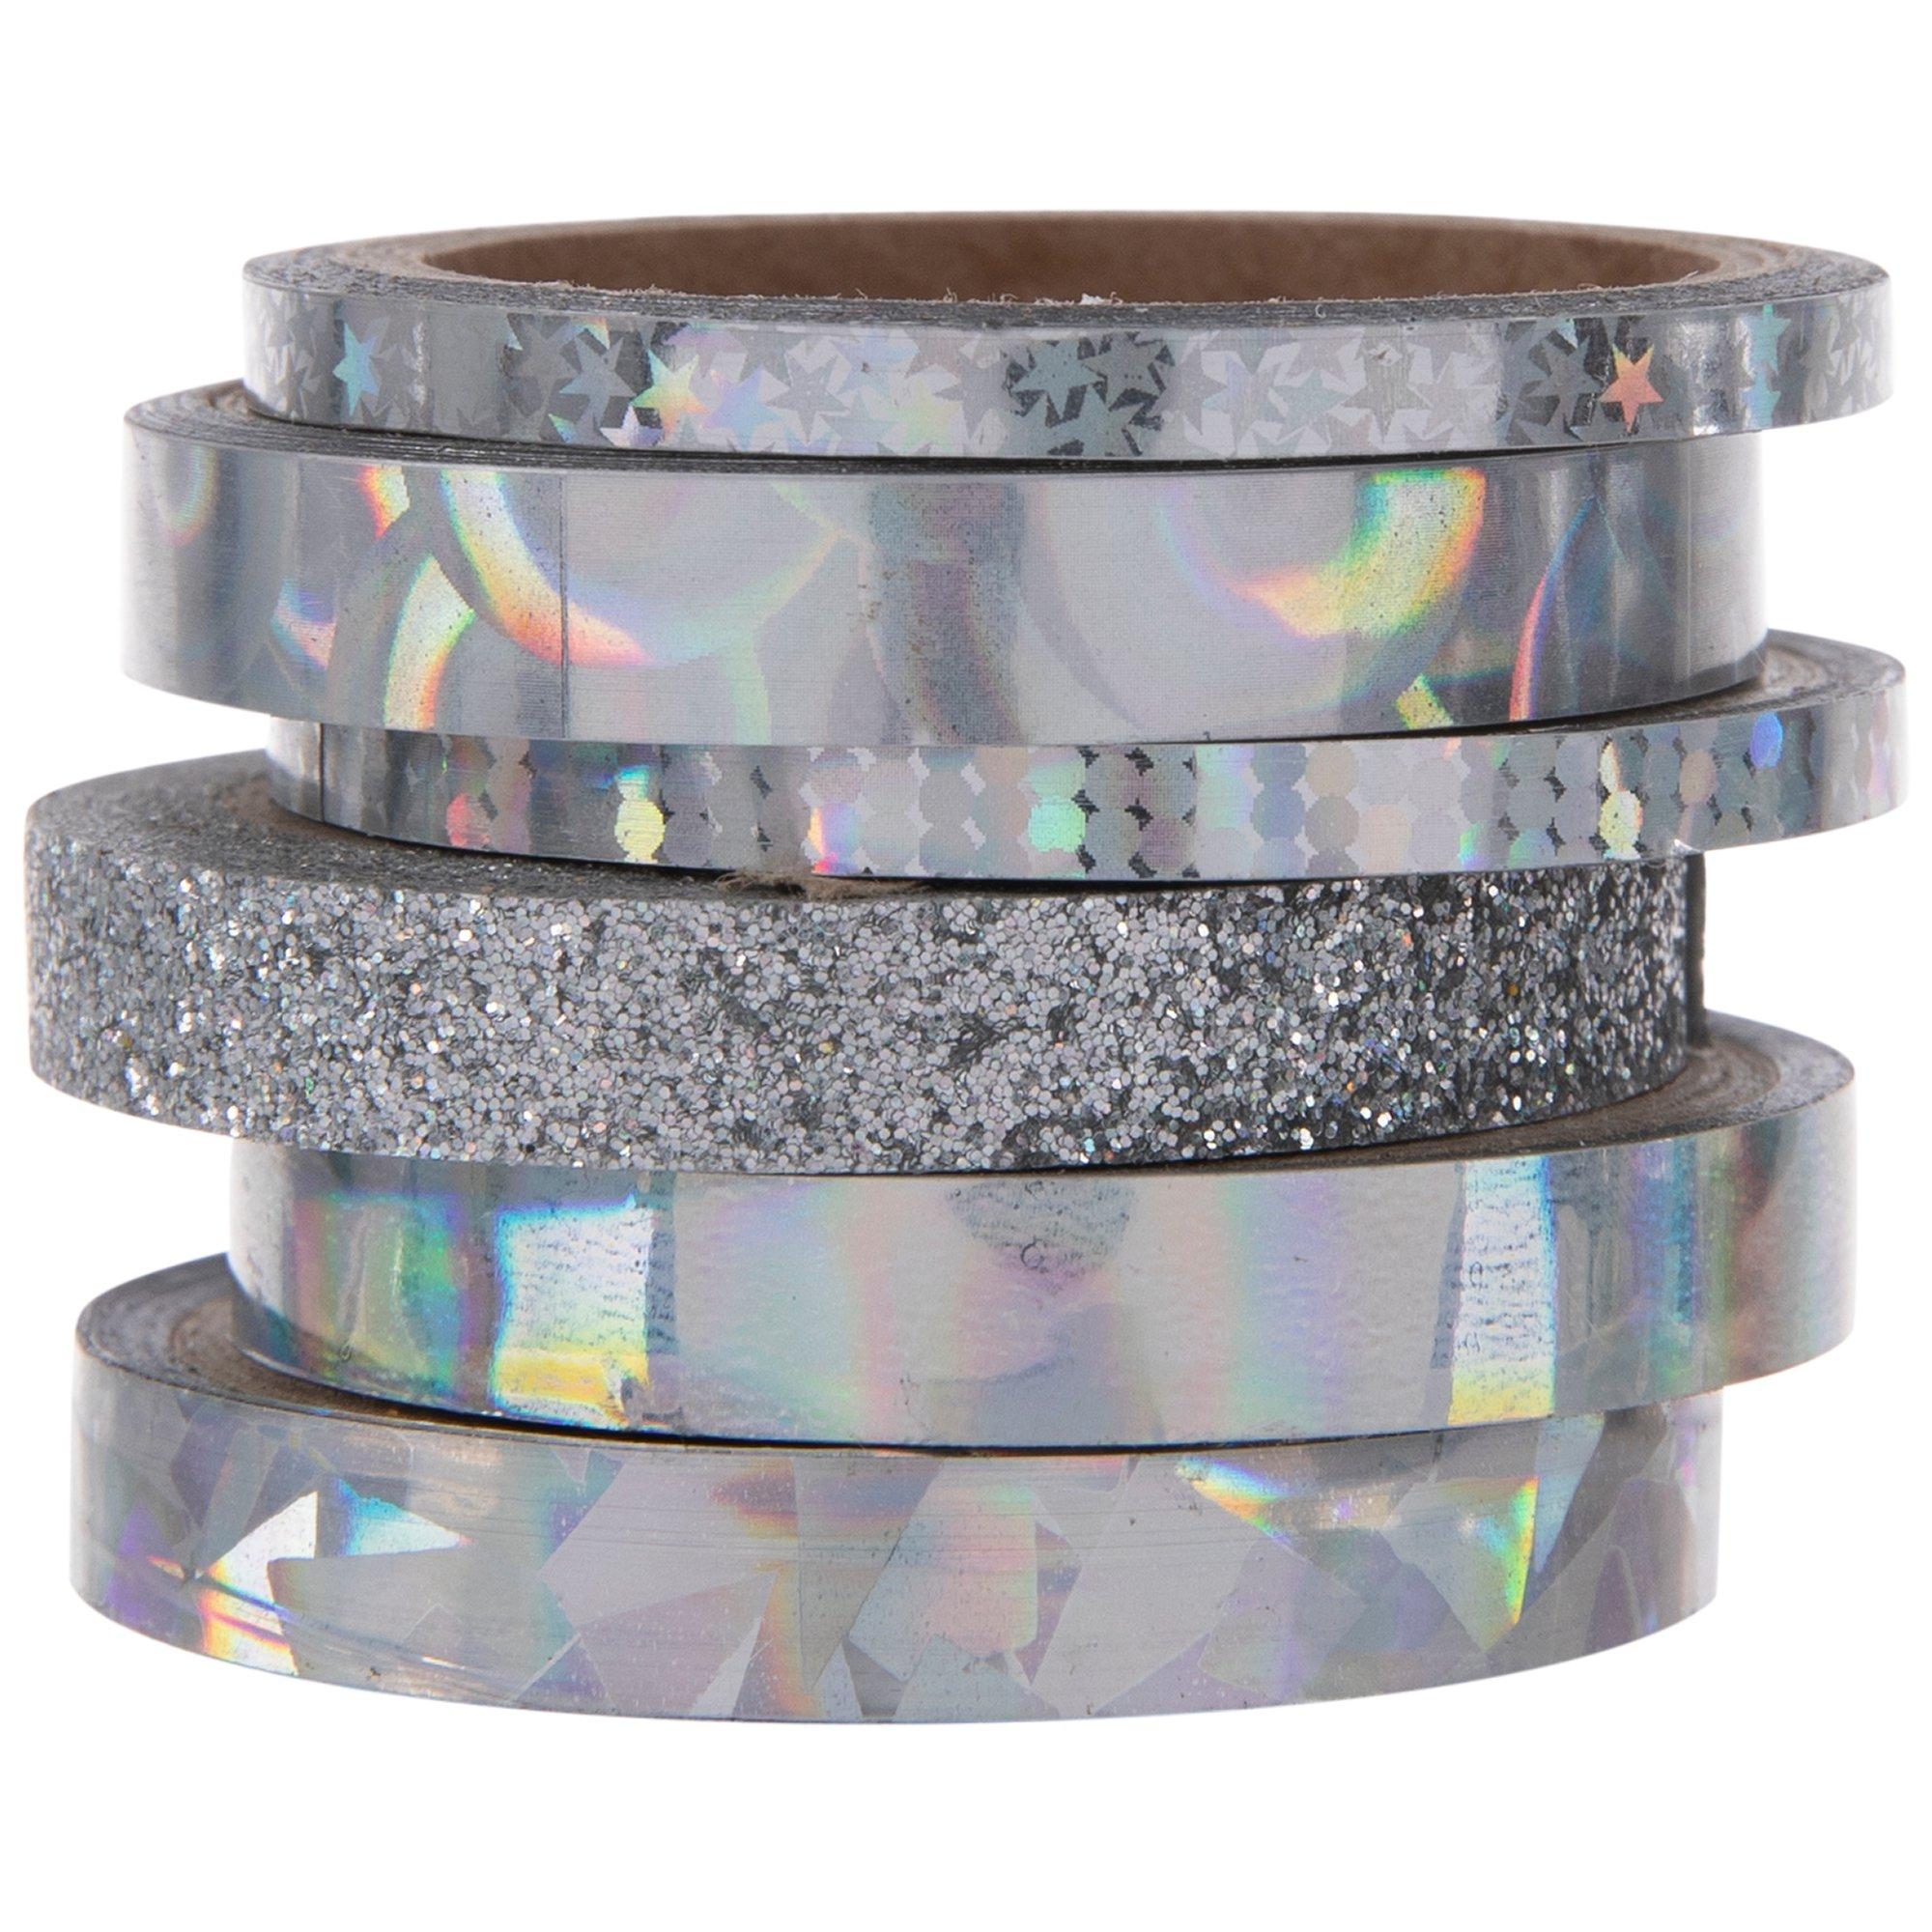 Holographic Tapes / Holo Tape / Mirror Tape / Washi Tape / Iridescent Tape  / Fluorescent Tape / Unicorn Tape (Blue Holographic Tape)